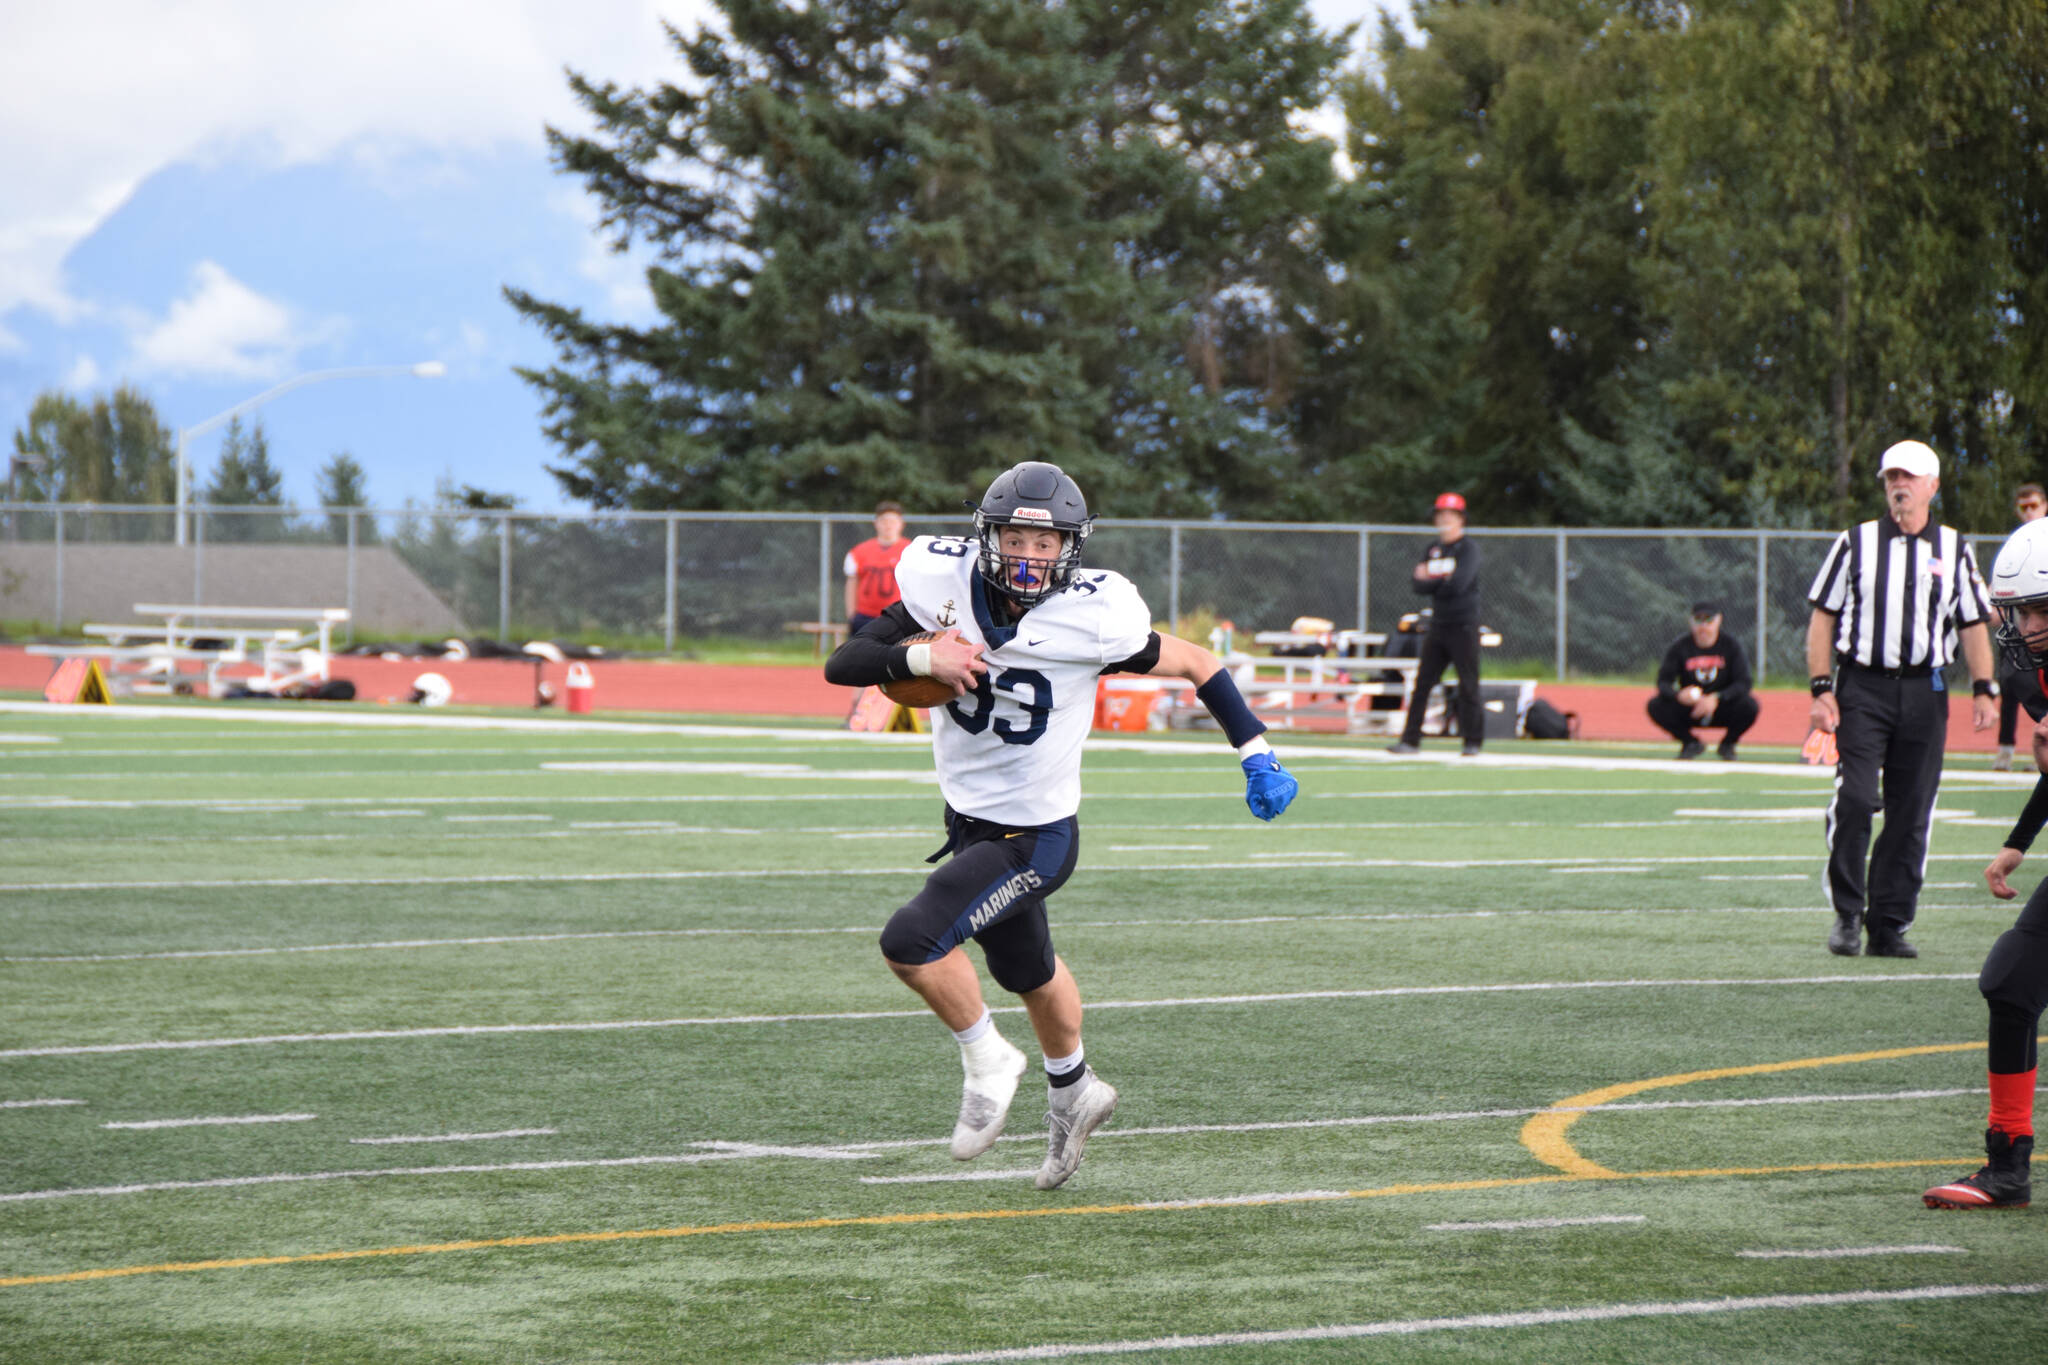 Jake Tappan sprints to the end-zone on Saturday, Sep. 3, at the Homer High School Field in Homer, Alaska. (Photo by Charlie Menke/ Homer News)